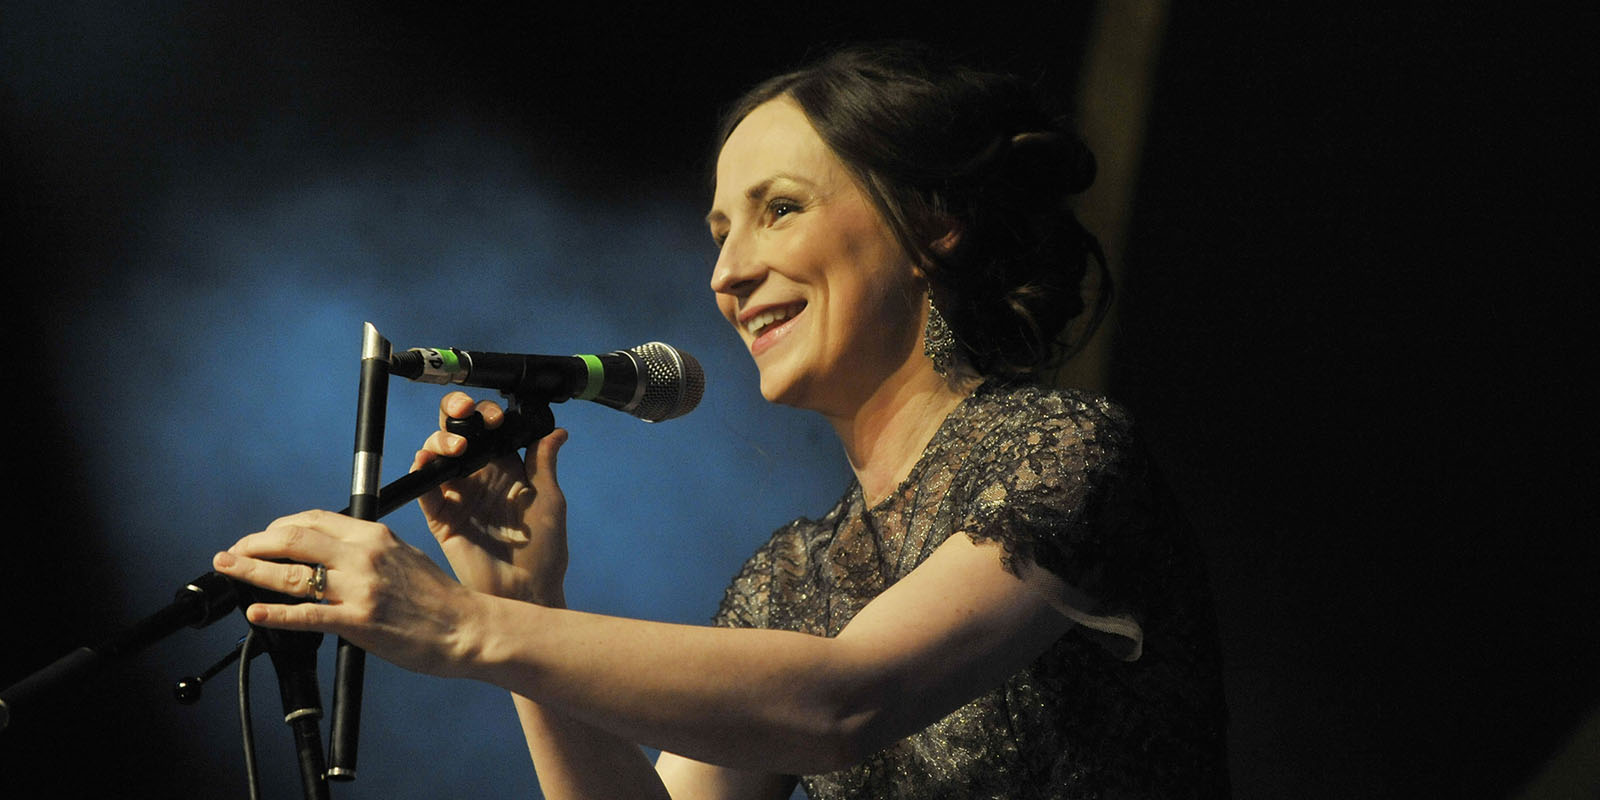 Julie Fowlis to perform “Music from the Scottish Isles”